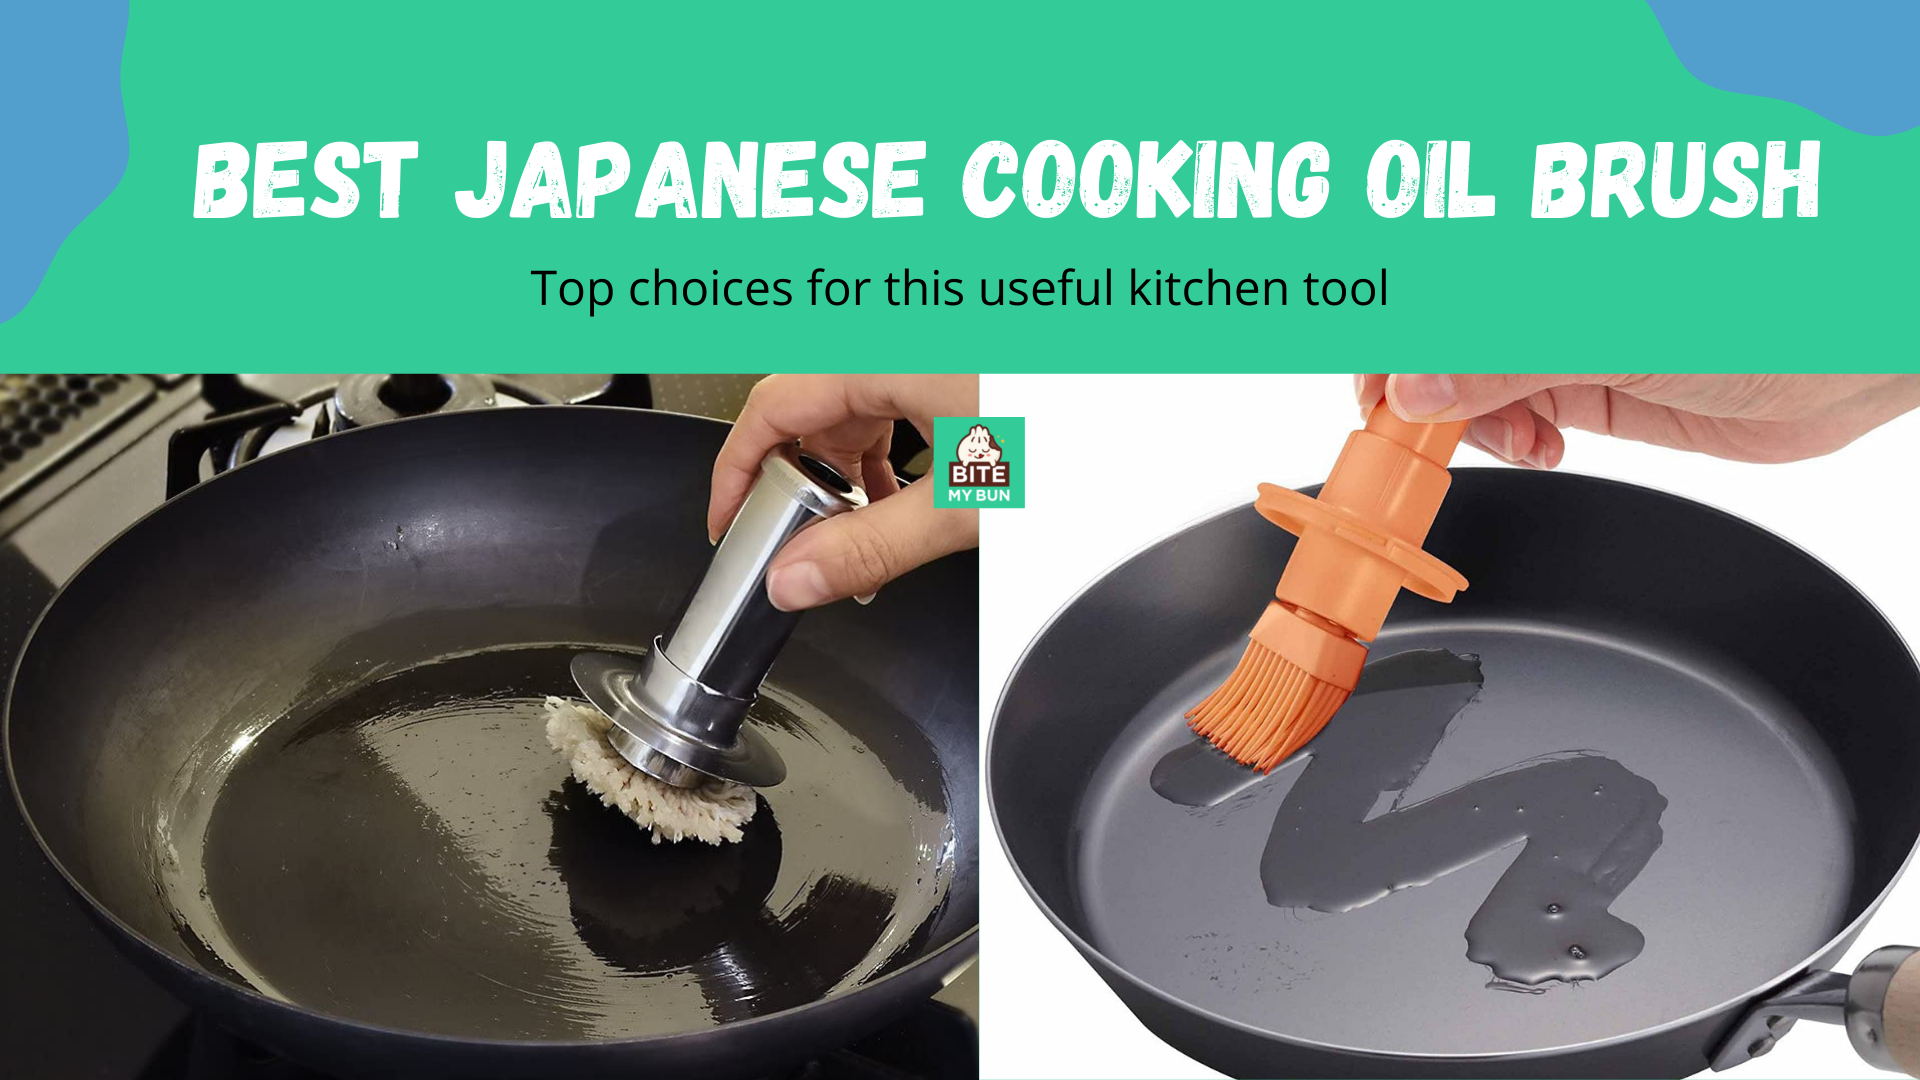 Japanese cooking oil brush | Top choices for this useful kitchen tool